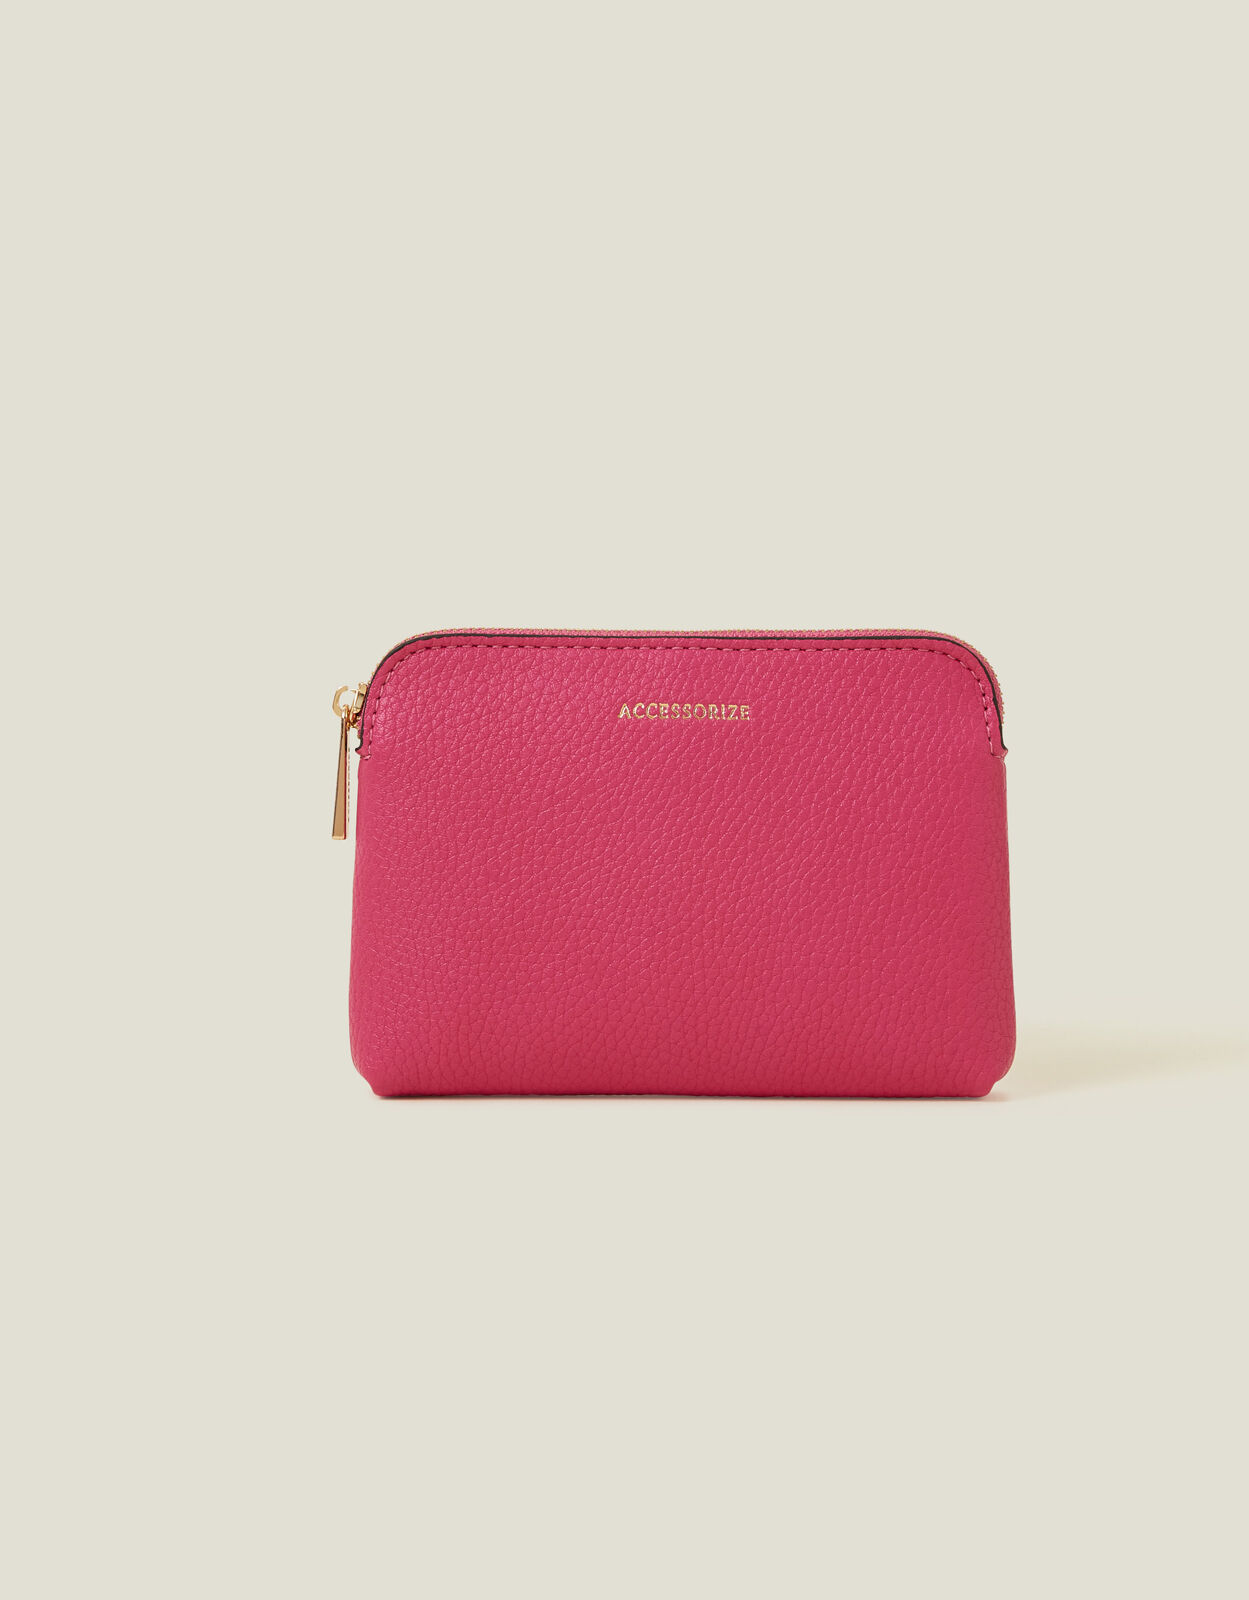 Lakeland Leather Small Leather Purse in Red | Lakeland Leather